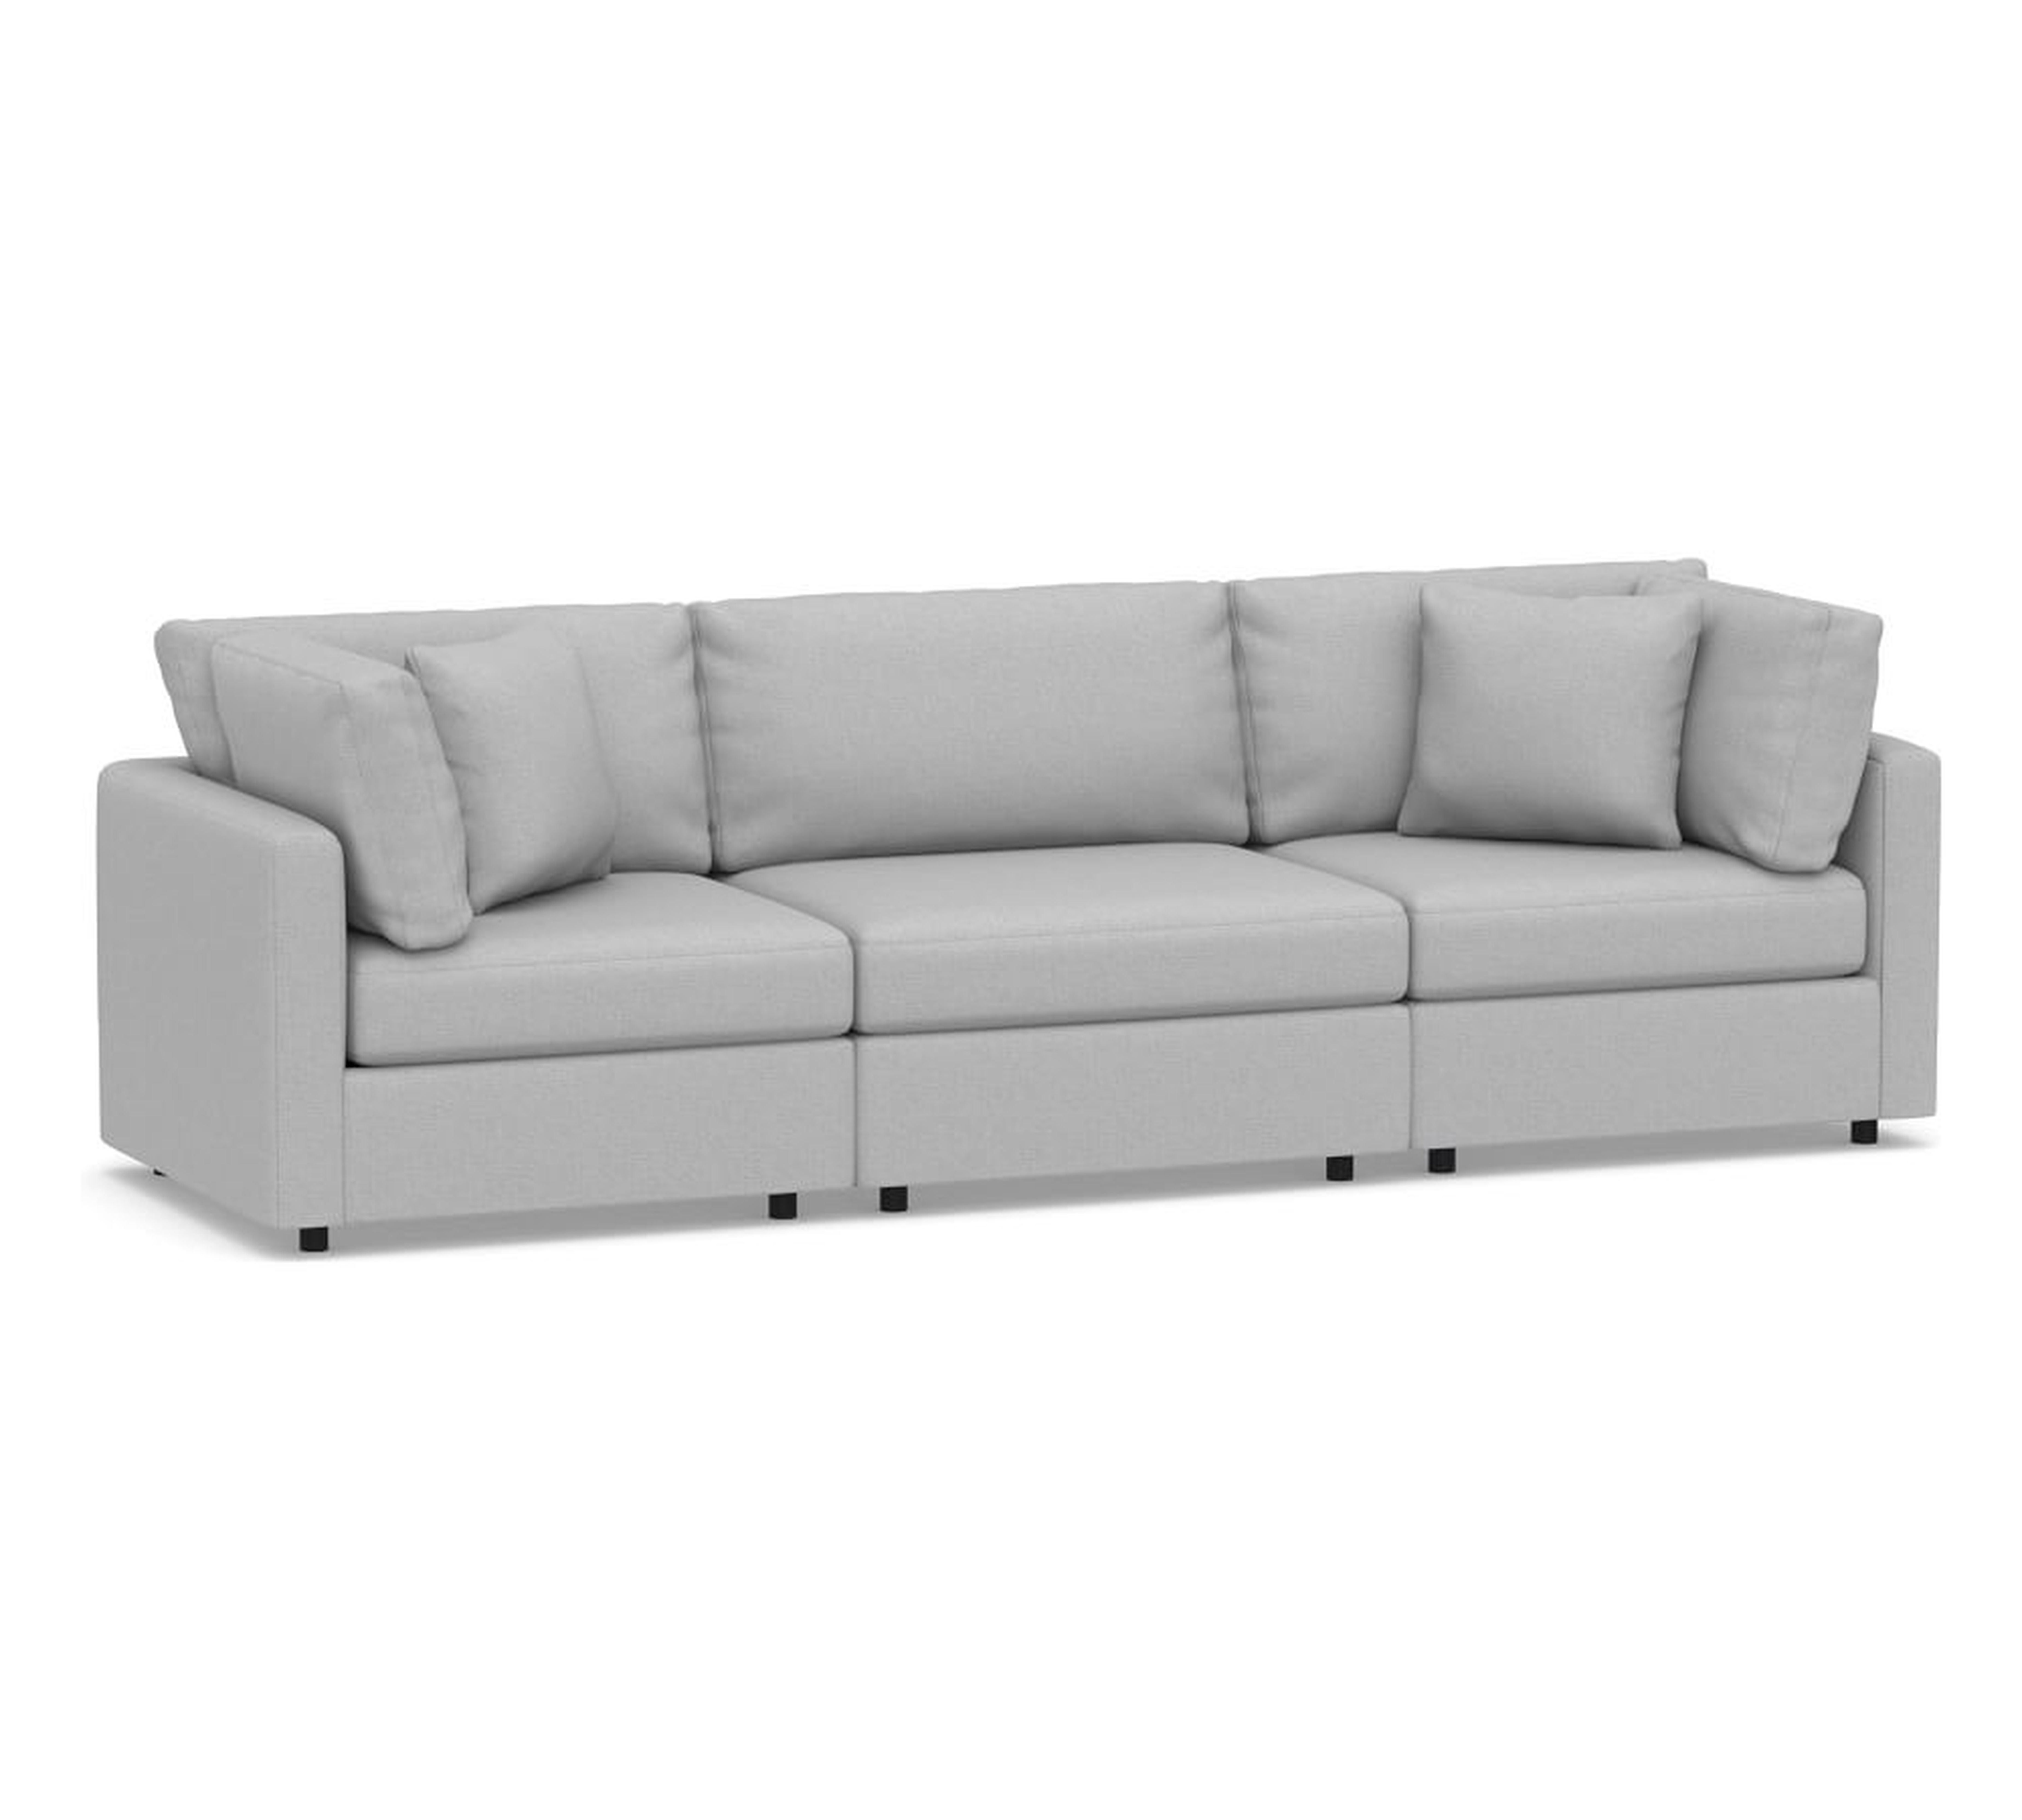 Modular Square Arm Upholstered Sofa 111", Down Blend Wrapped Cushions, Brushed Crossweave Light Gray - Pottery Barn